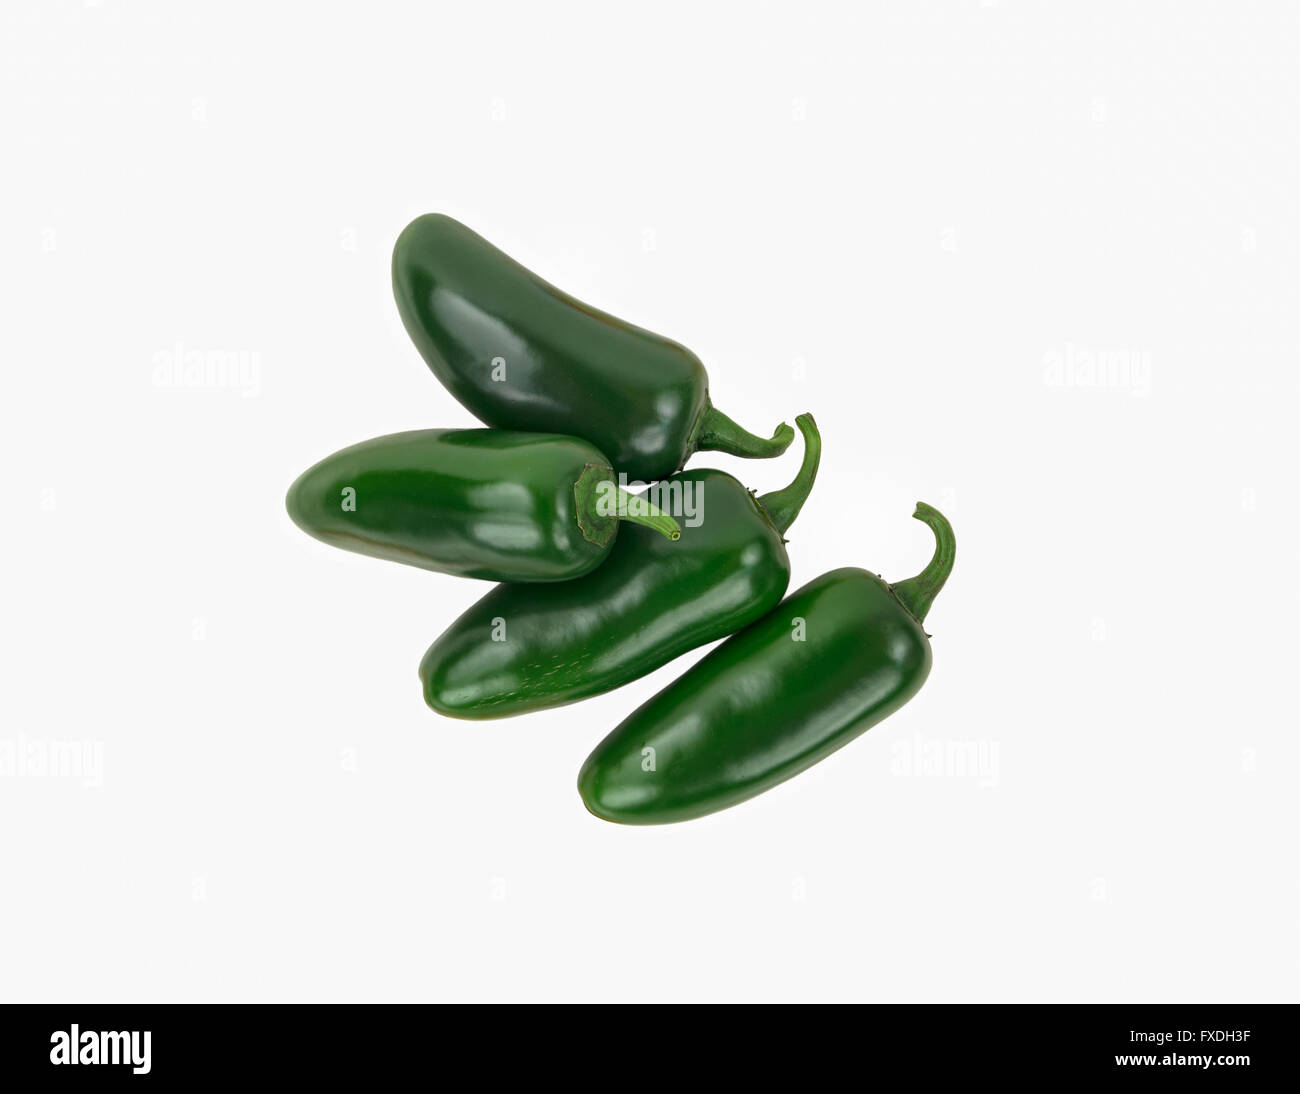 Four Green Spicy Jalapeno Peppers Stacked and Isolated on White. Stock Photo